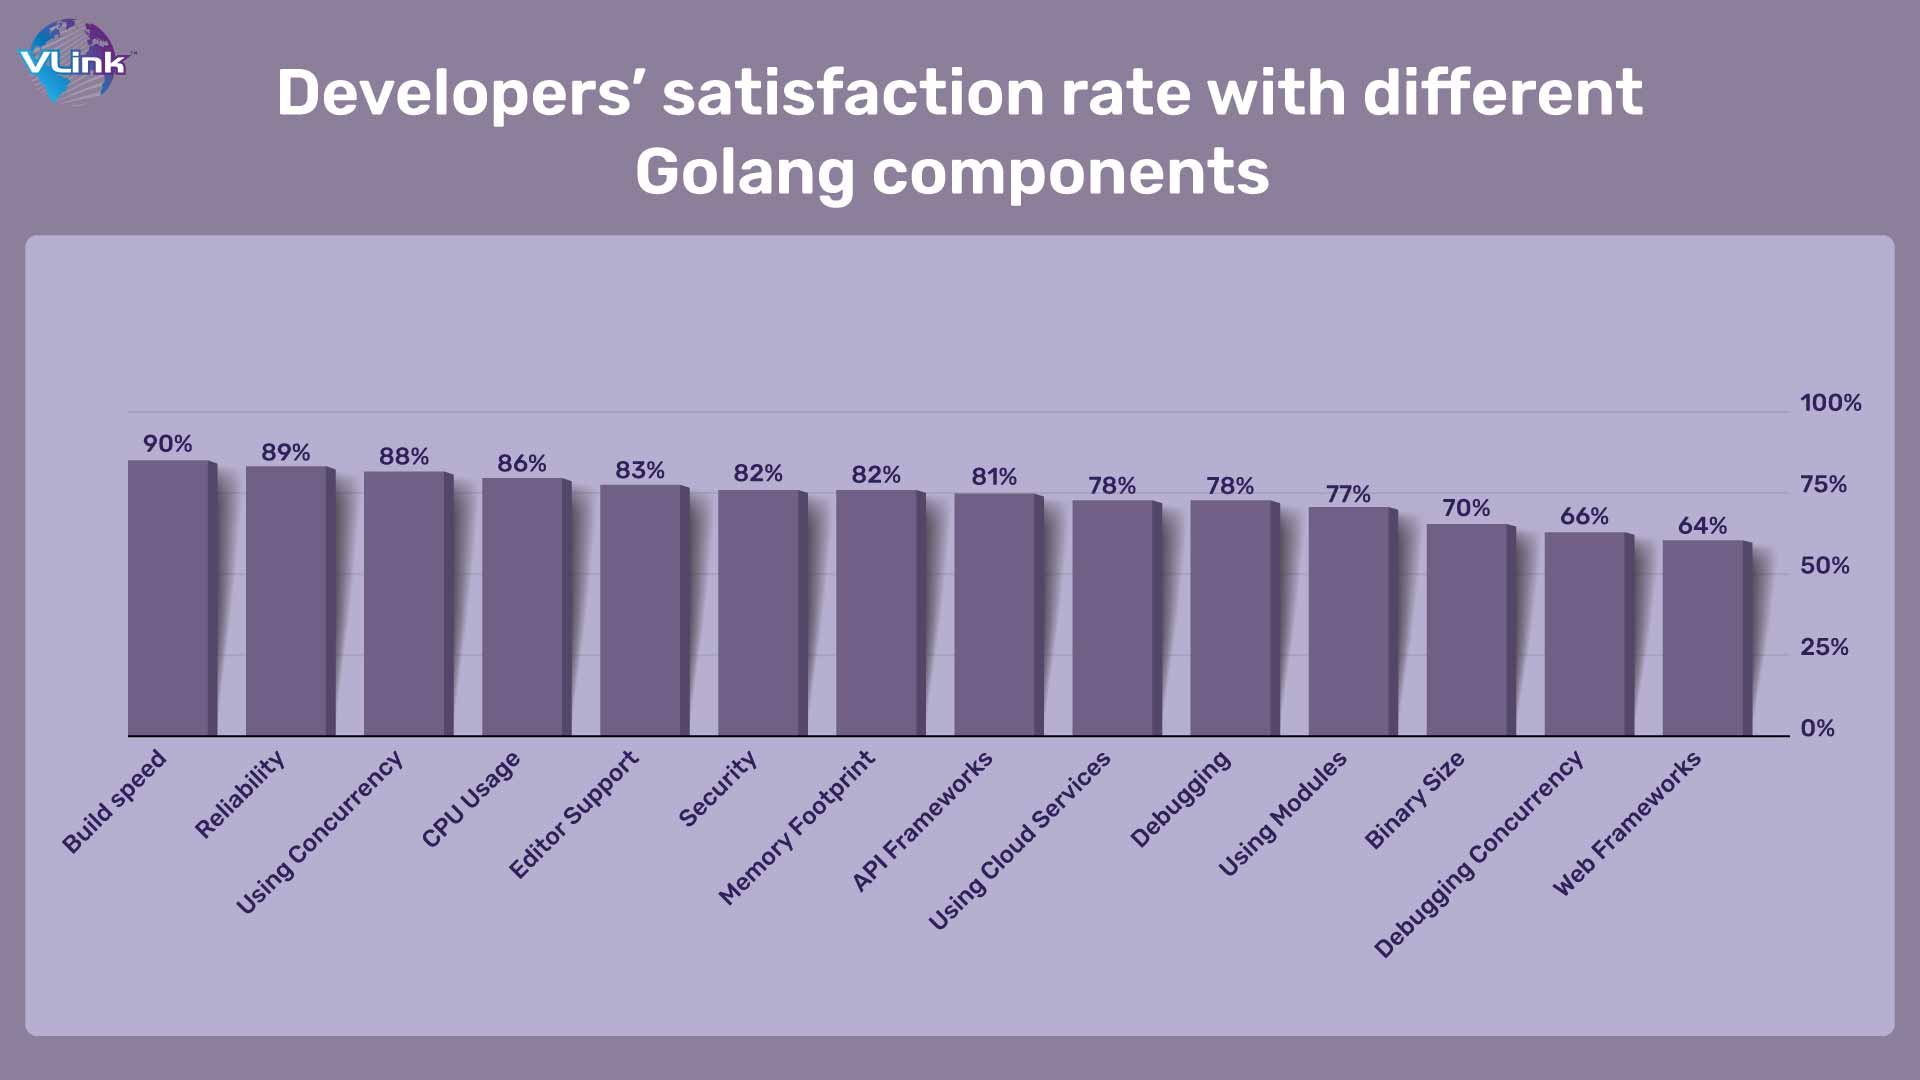 Developers’ satisfaction rate with different Golang components